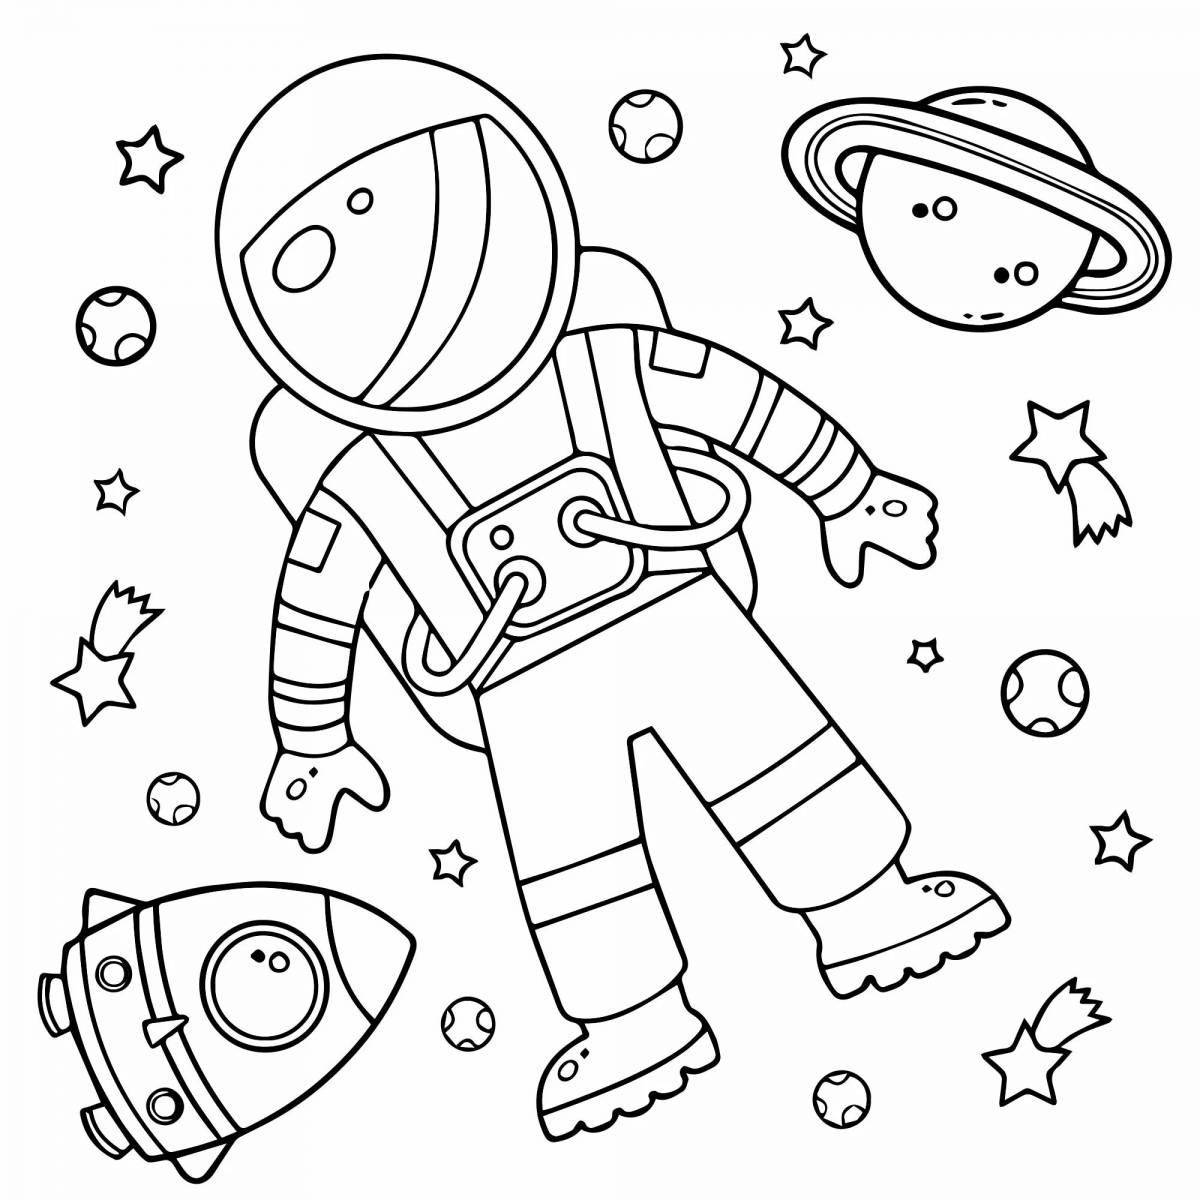 Adorable space coloring book for 4-5 year olds